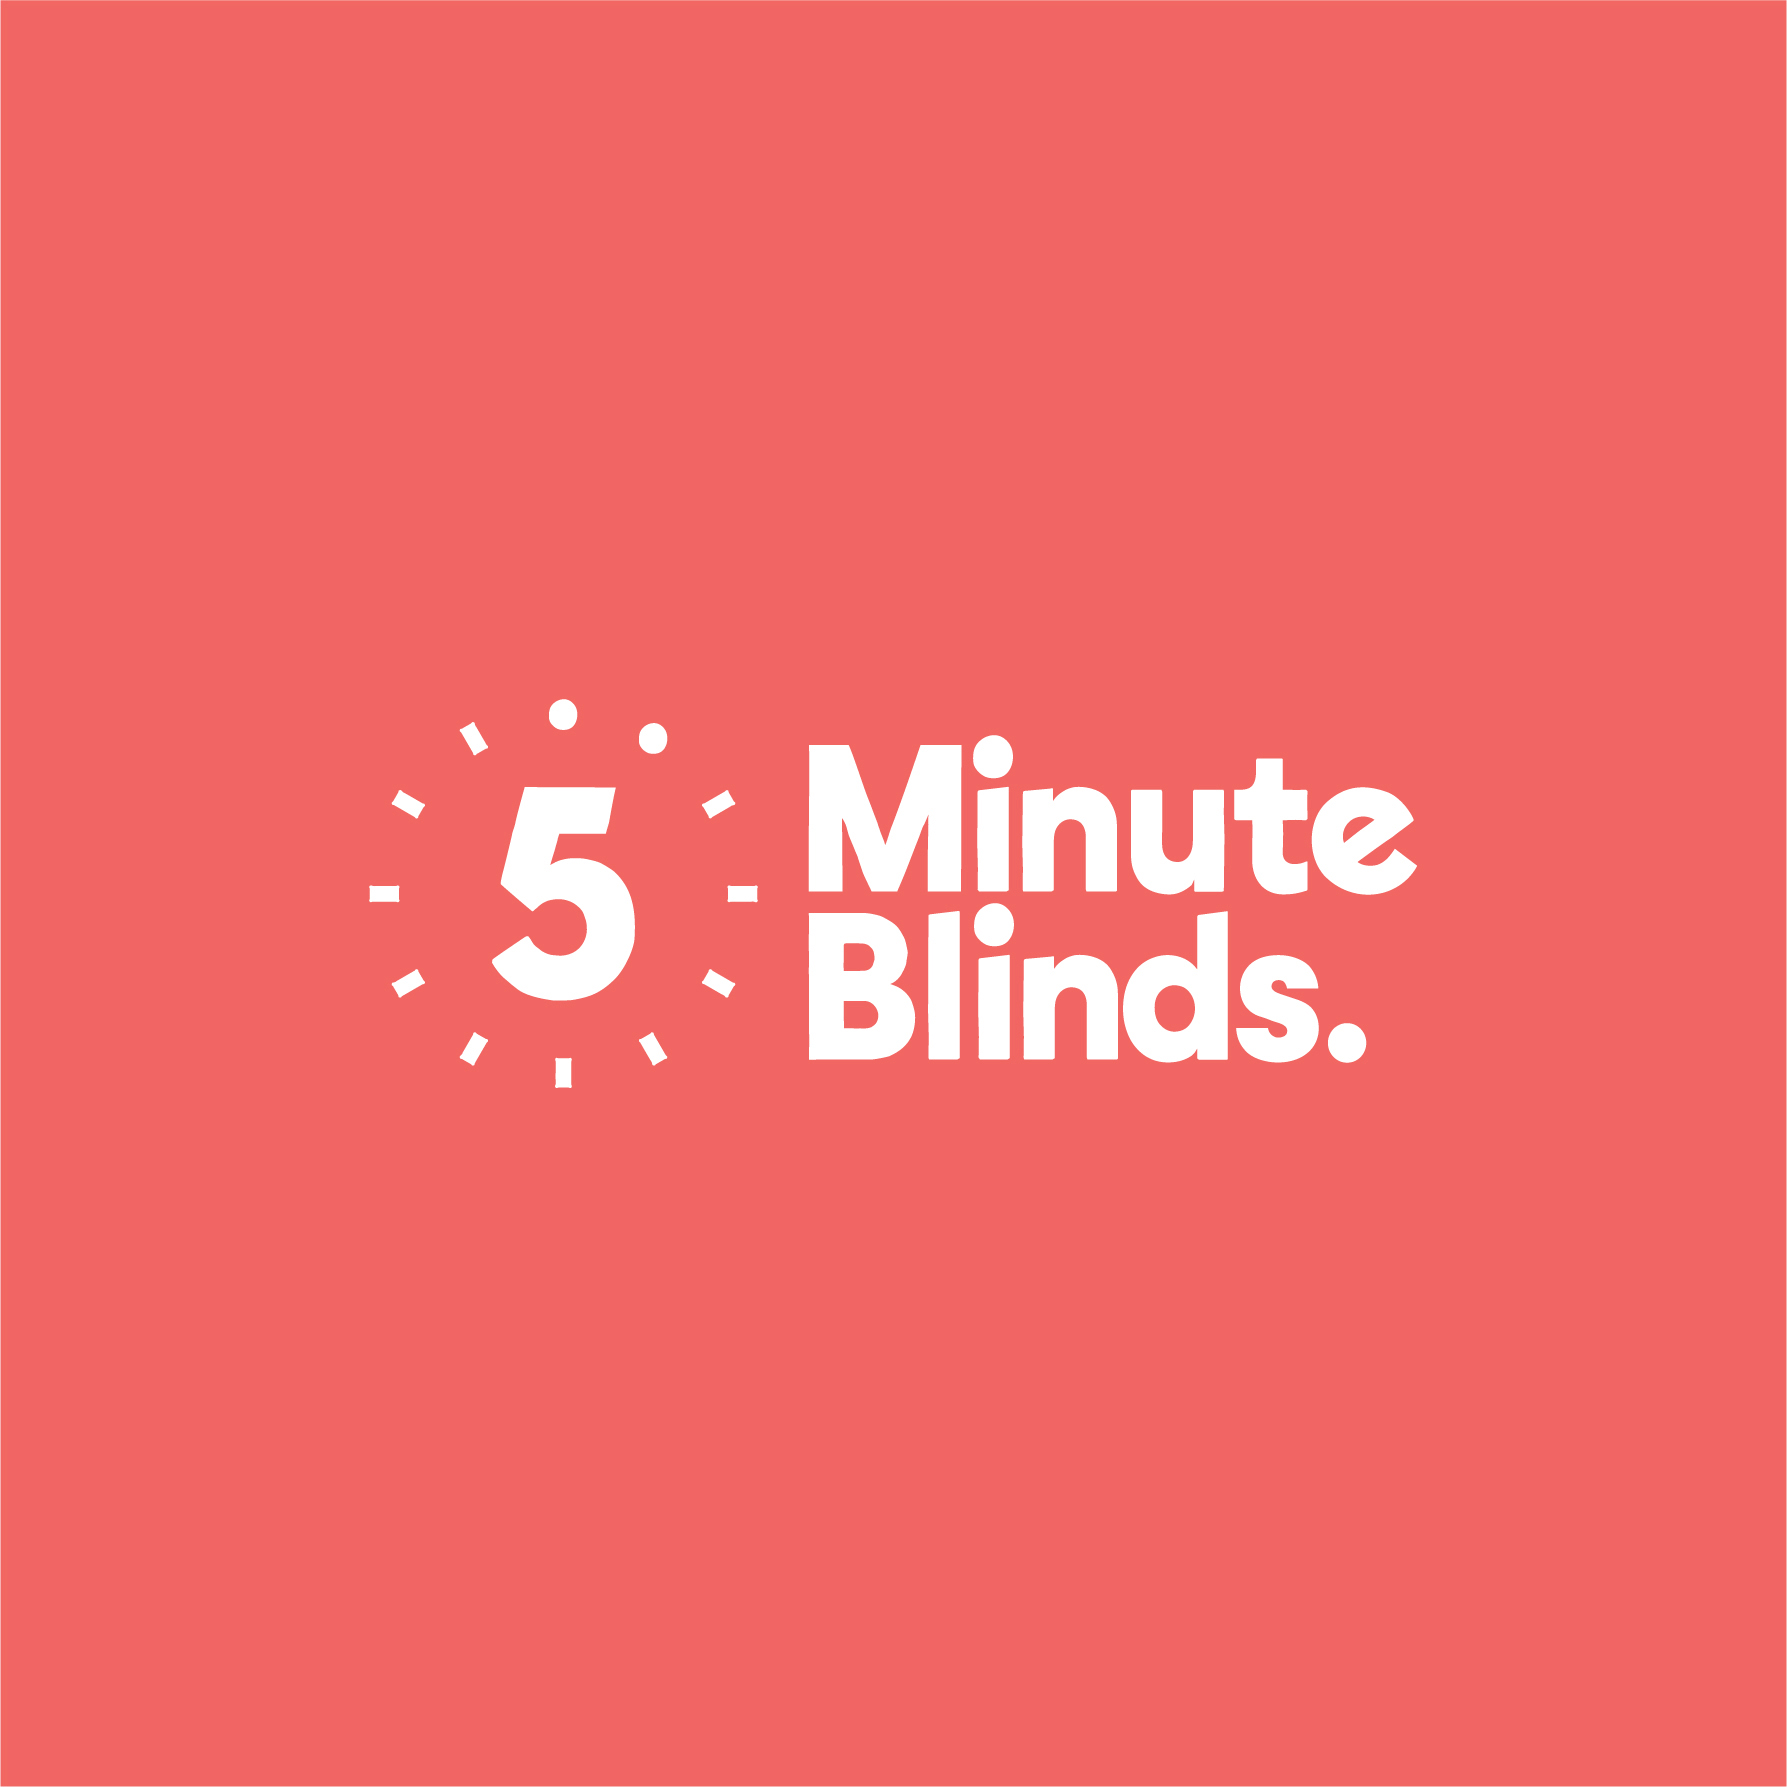 5 Minute Blinds: Redefining DIY Window Furnishings with the Launch of a Groundbreaking Online Venture